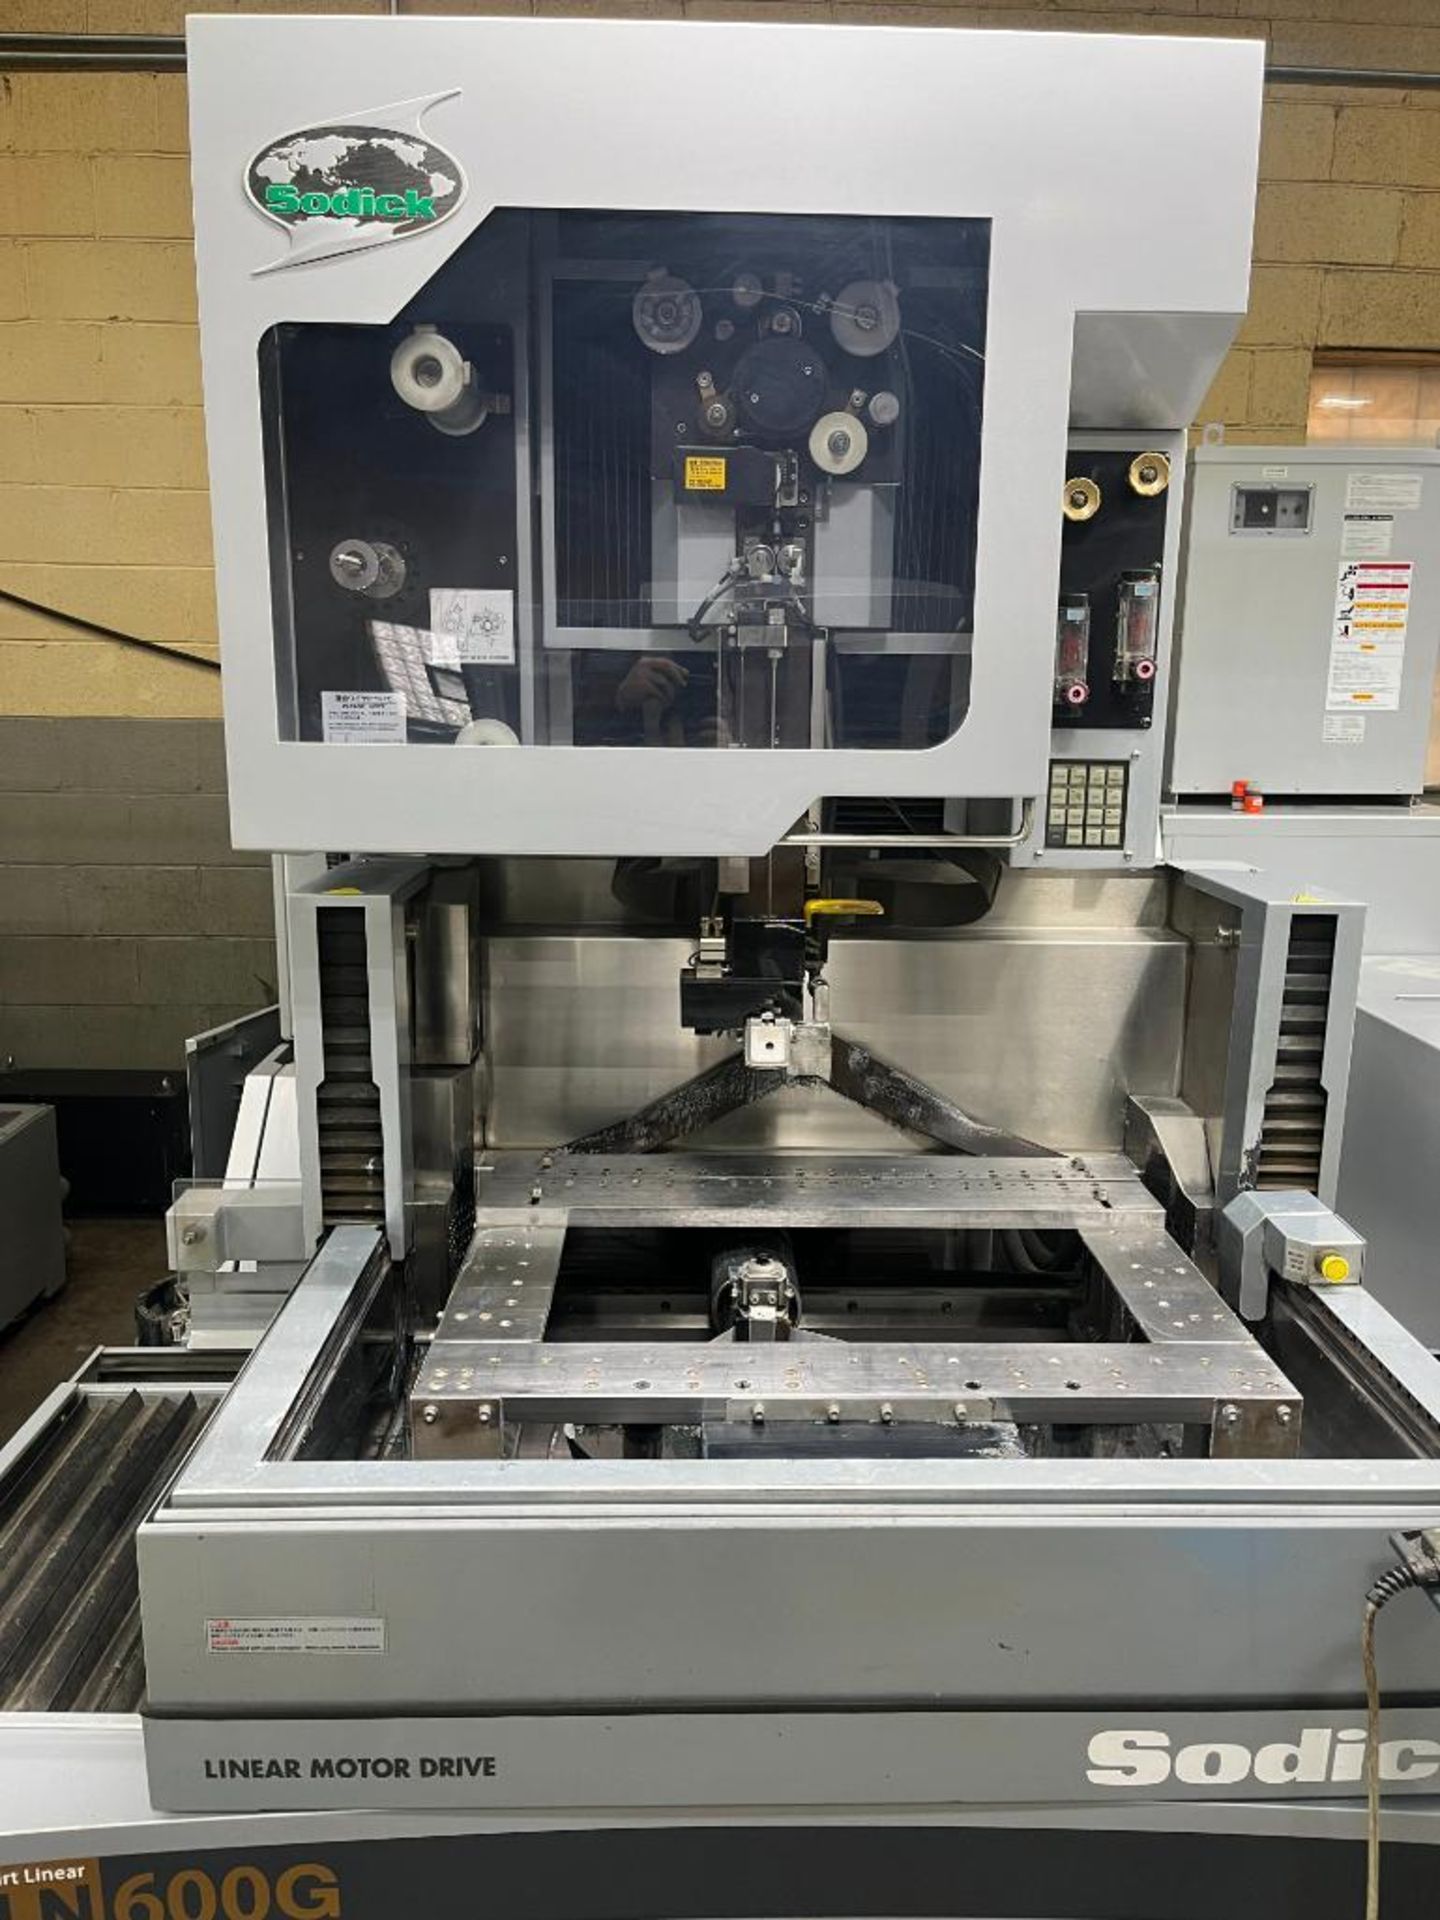 Sodick CNC Wire-Cut EDM Machine Model SLN600G, S/N T0632 (2015) with Sodick SPW CNC Control. With 10 - Image 7 of 43